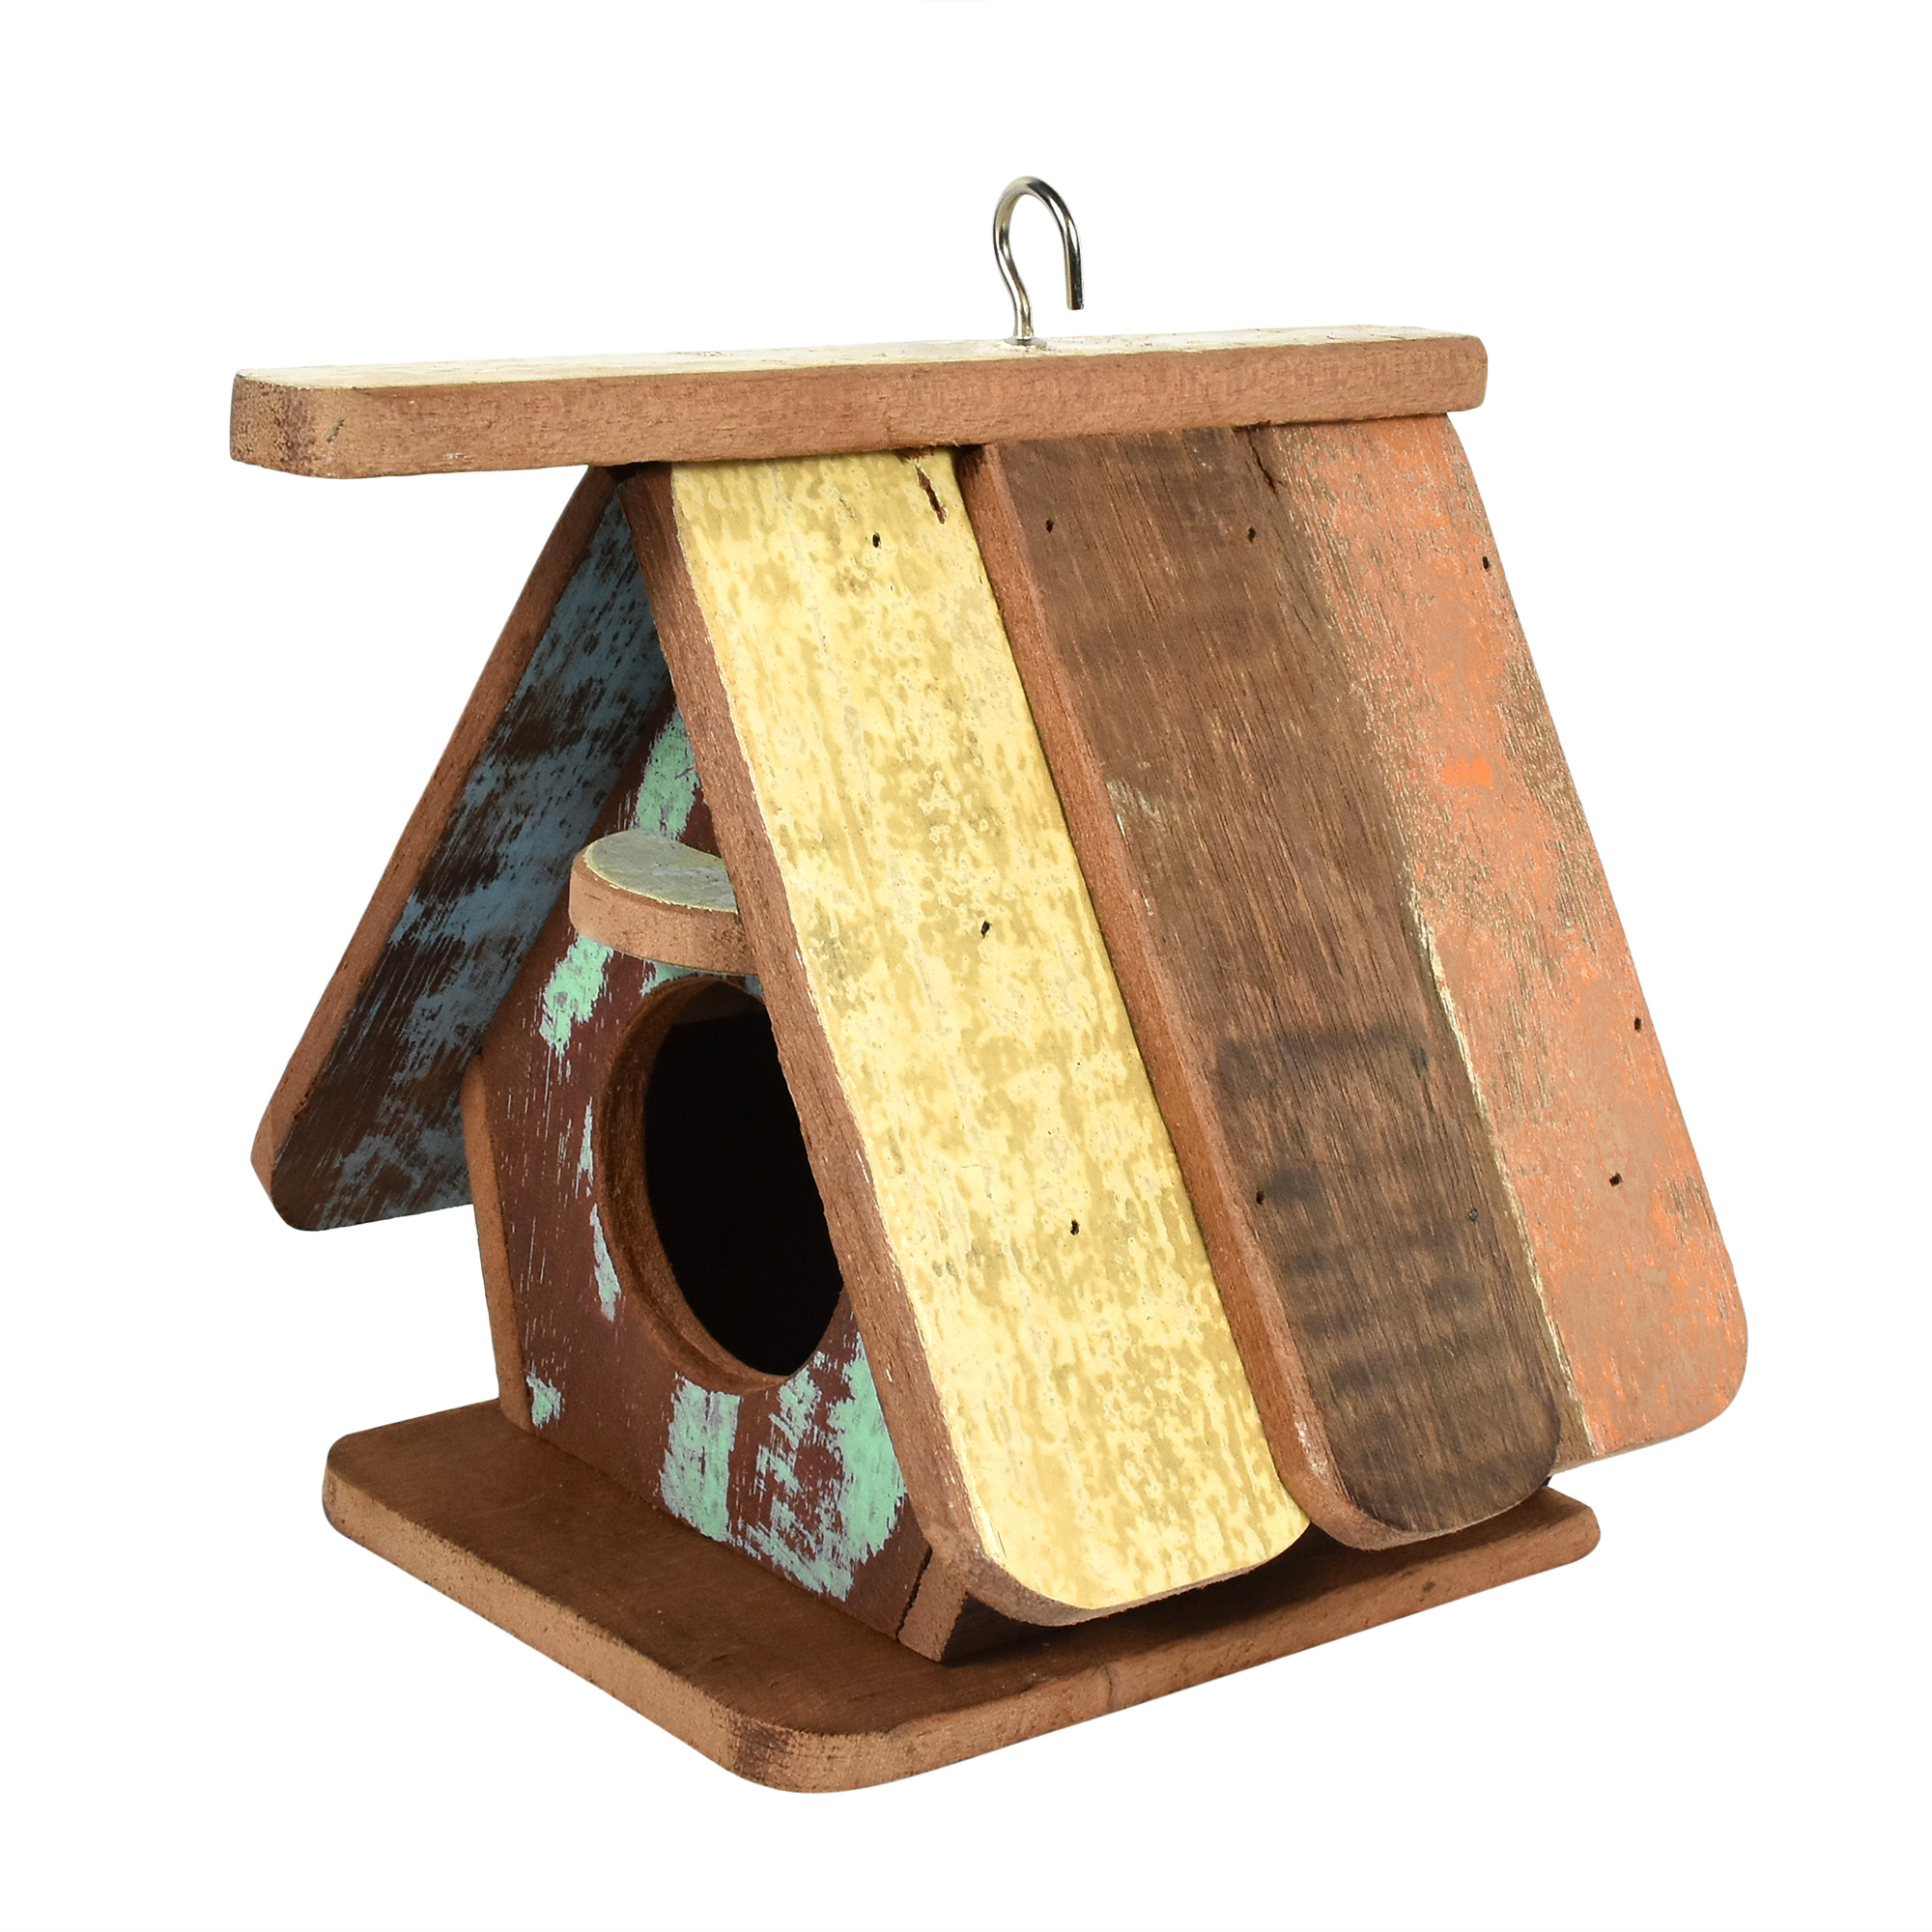 Handcrafted Pastel Bird House Wood Hanging Decor - image 4 of 5